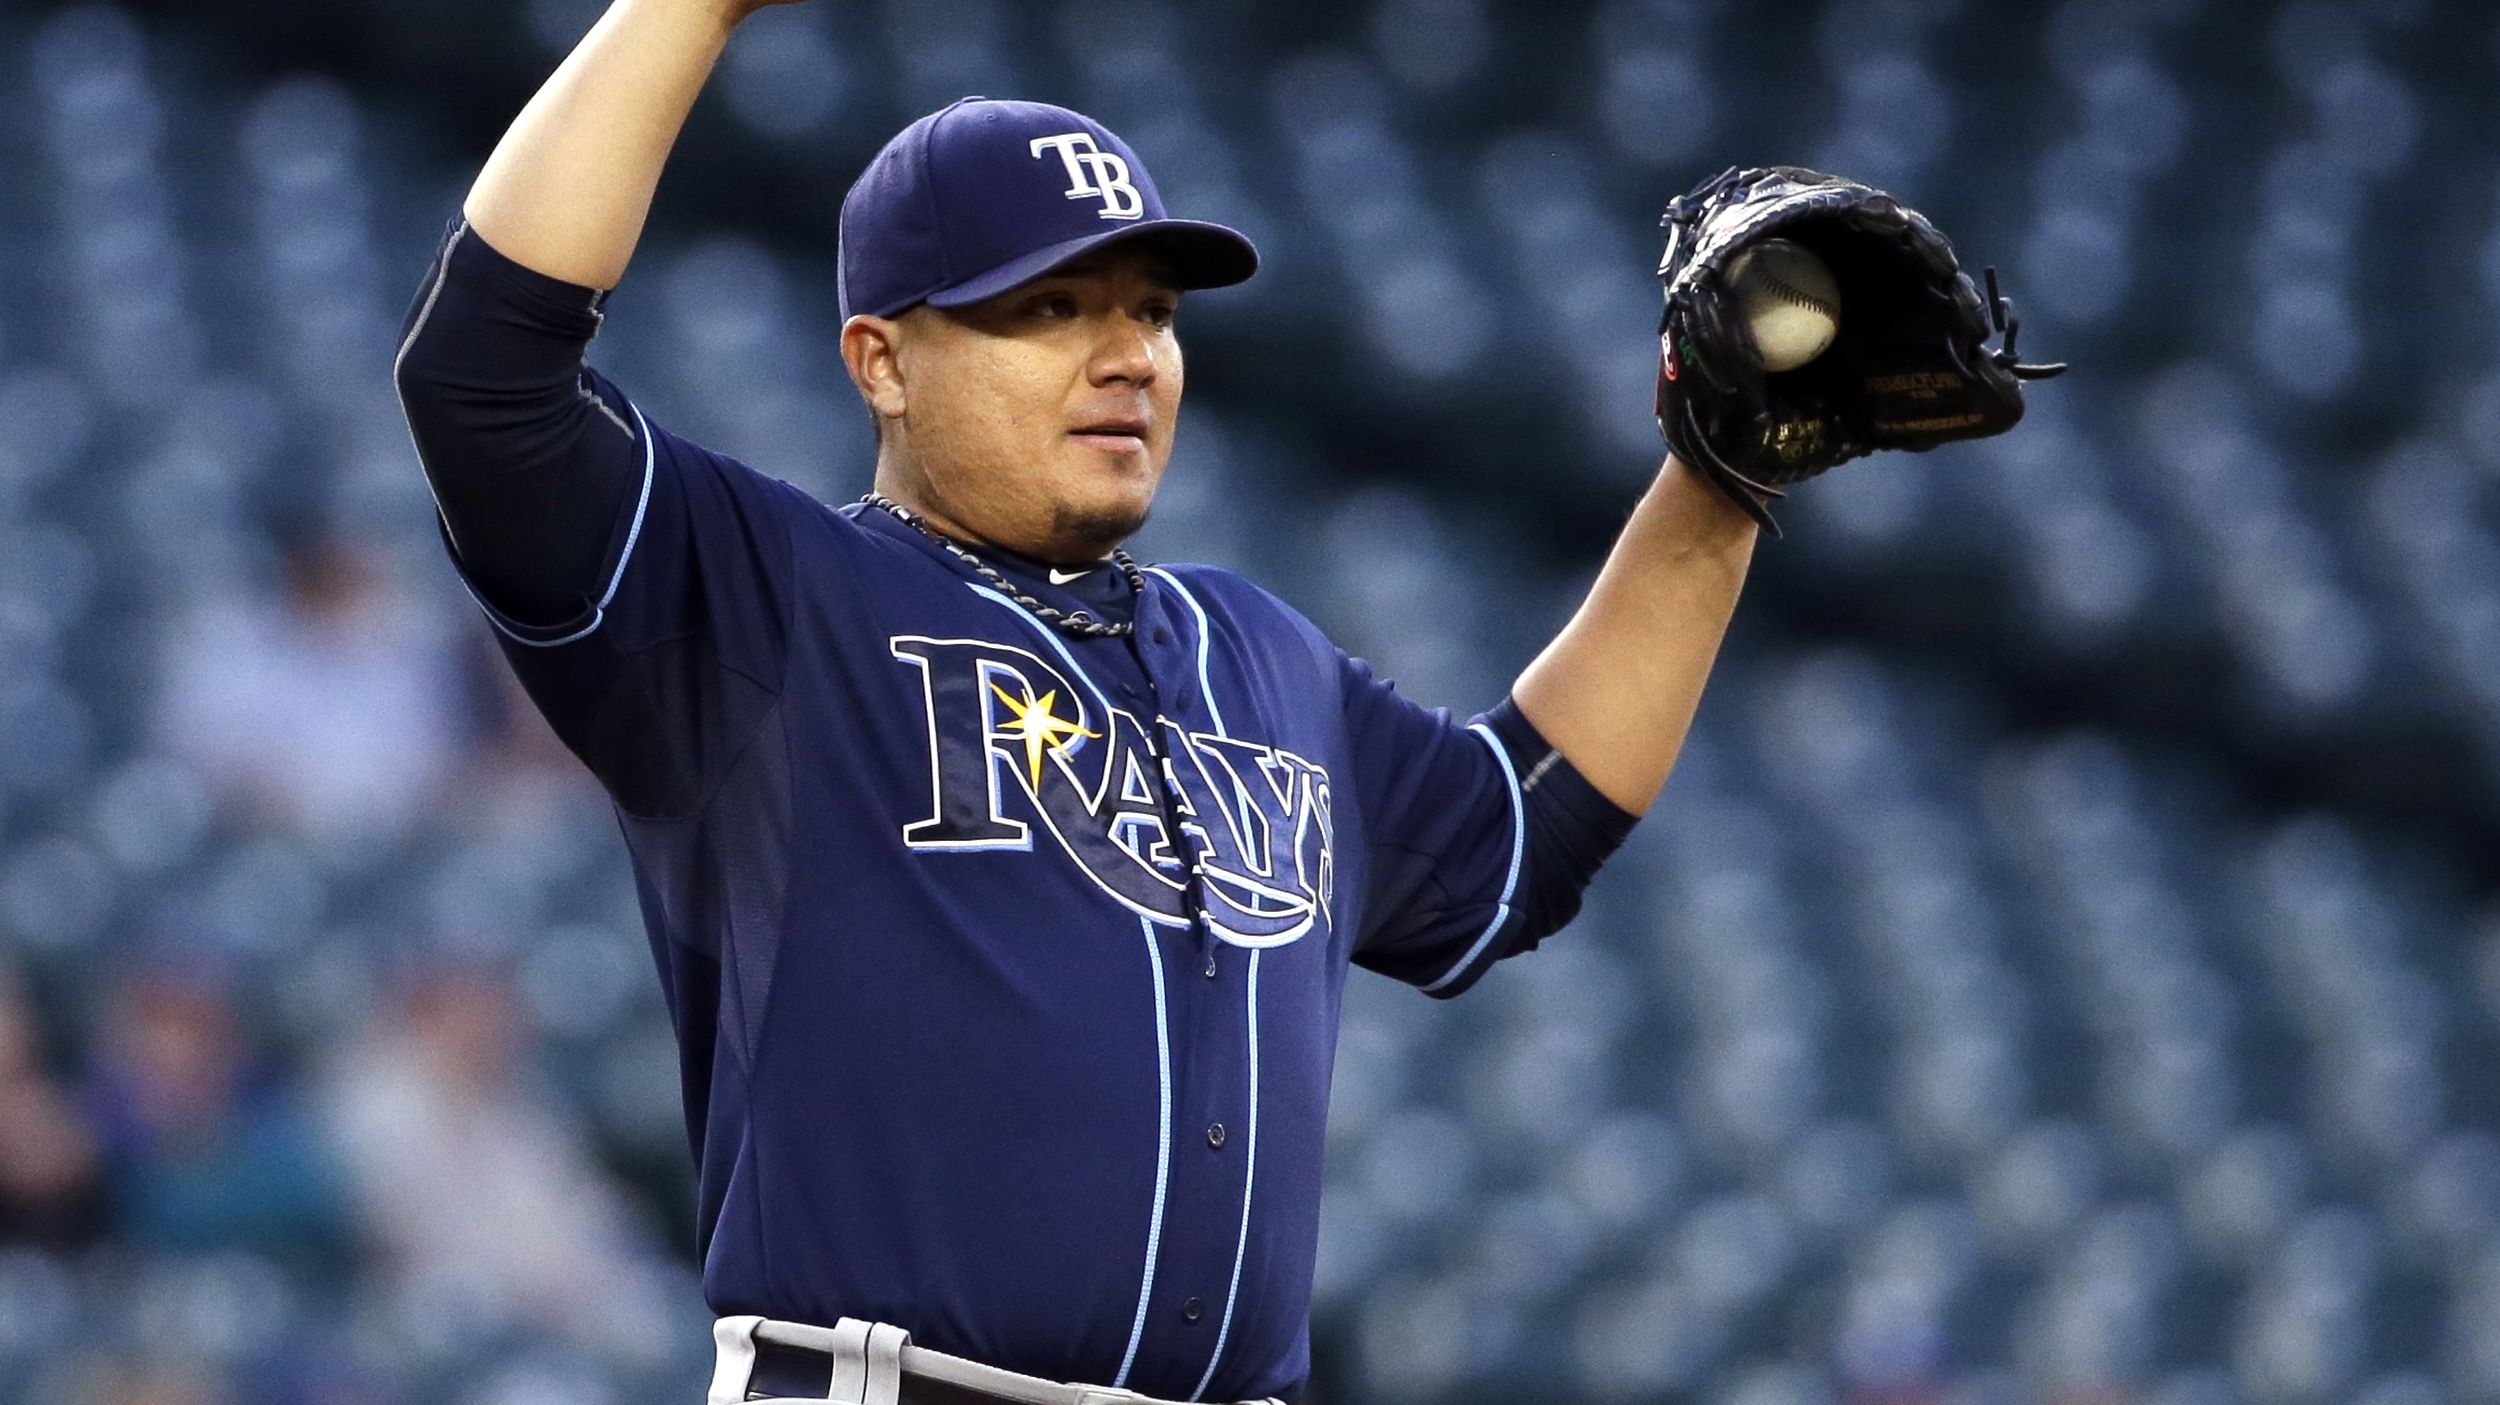 Throwback Thursday: Mariners' Recent Dominance of the Rays